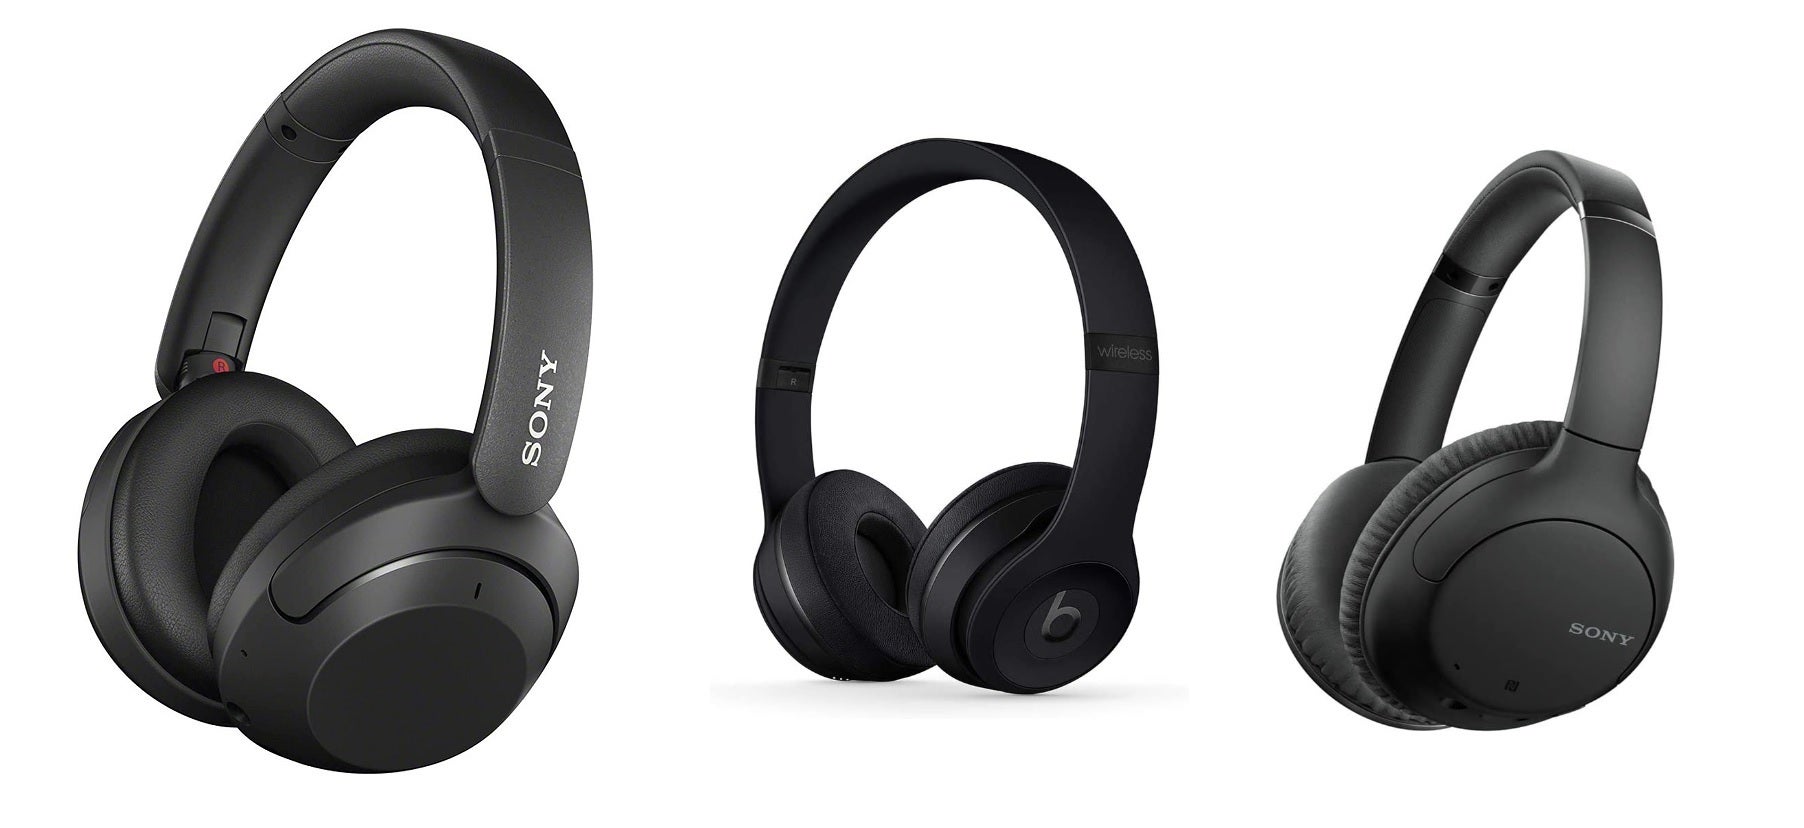 Sony WH-XB910N (left), Beats Solo3 (center), and Sony WH-CH710N (right) - Buying guide: Sony WH-1000XM4 vs Bose QuietComfort 45 vs Bose 700 and Sony WH-XB910N vs Beats Solo3 vs Sony WH-CH710N